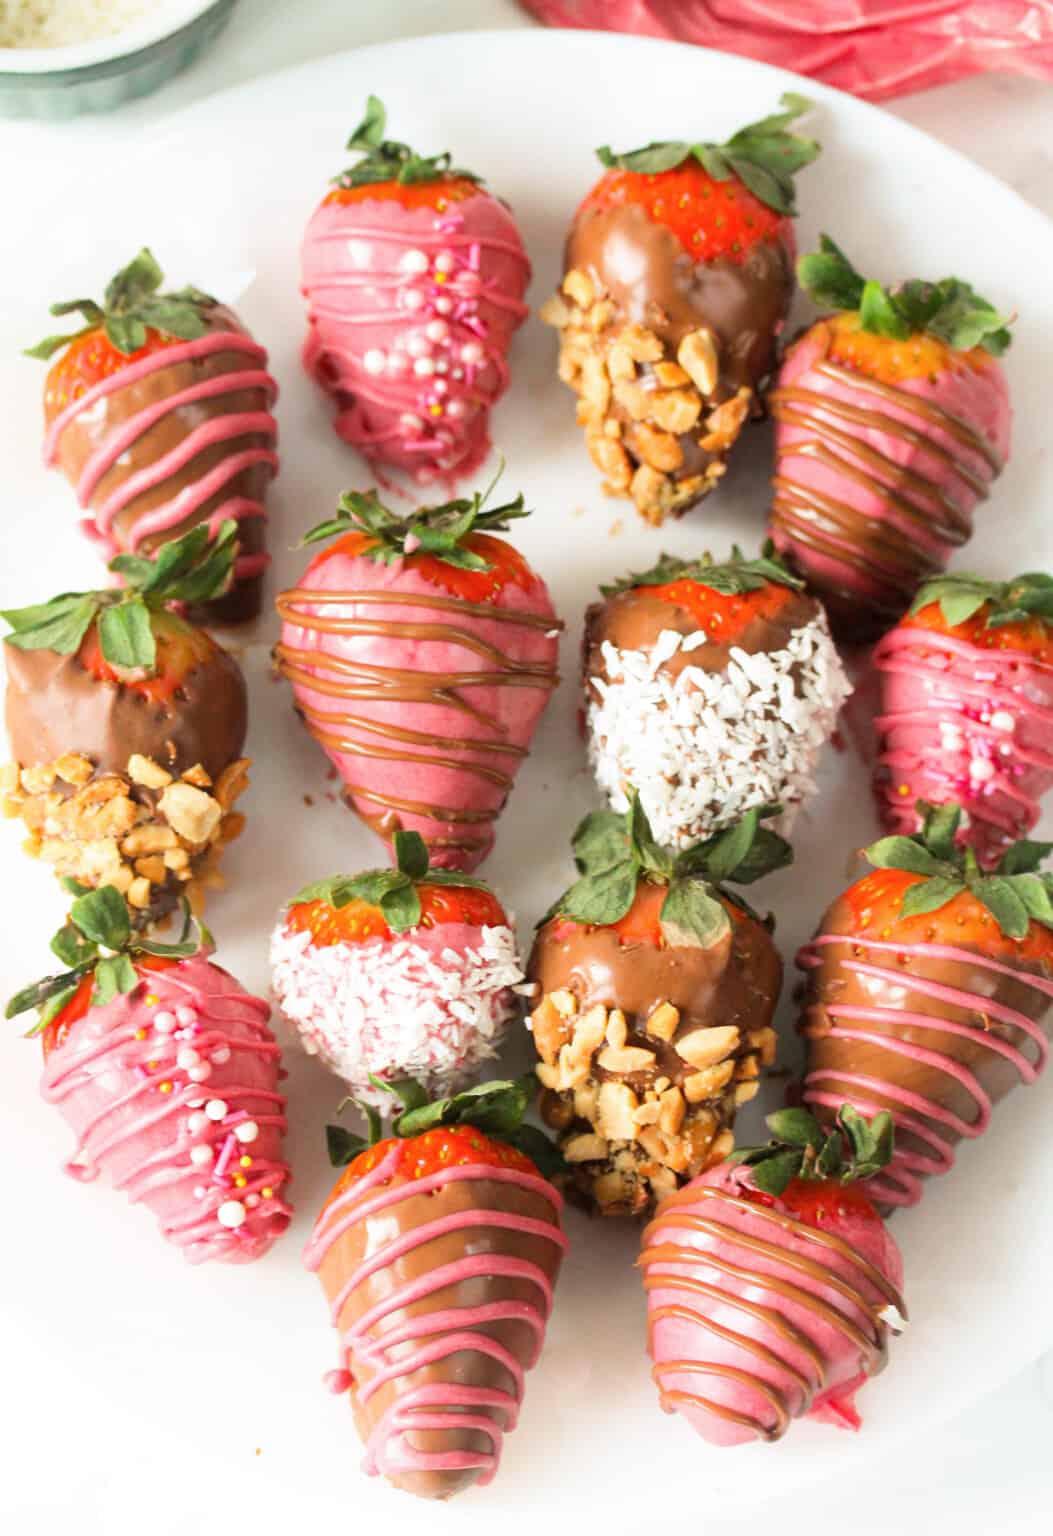 Strawberries dipped in chocolate and drizzled with more chocolate or sprinkles.